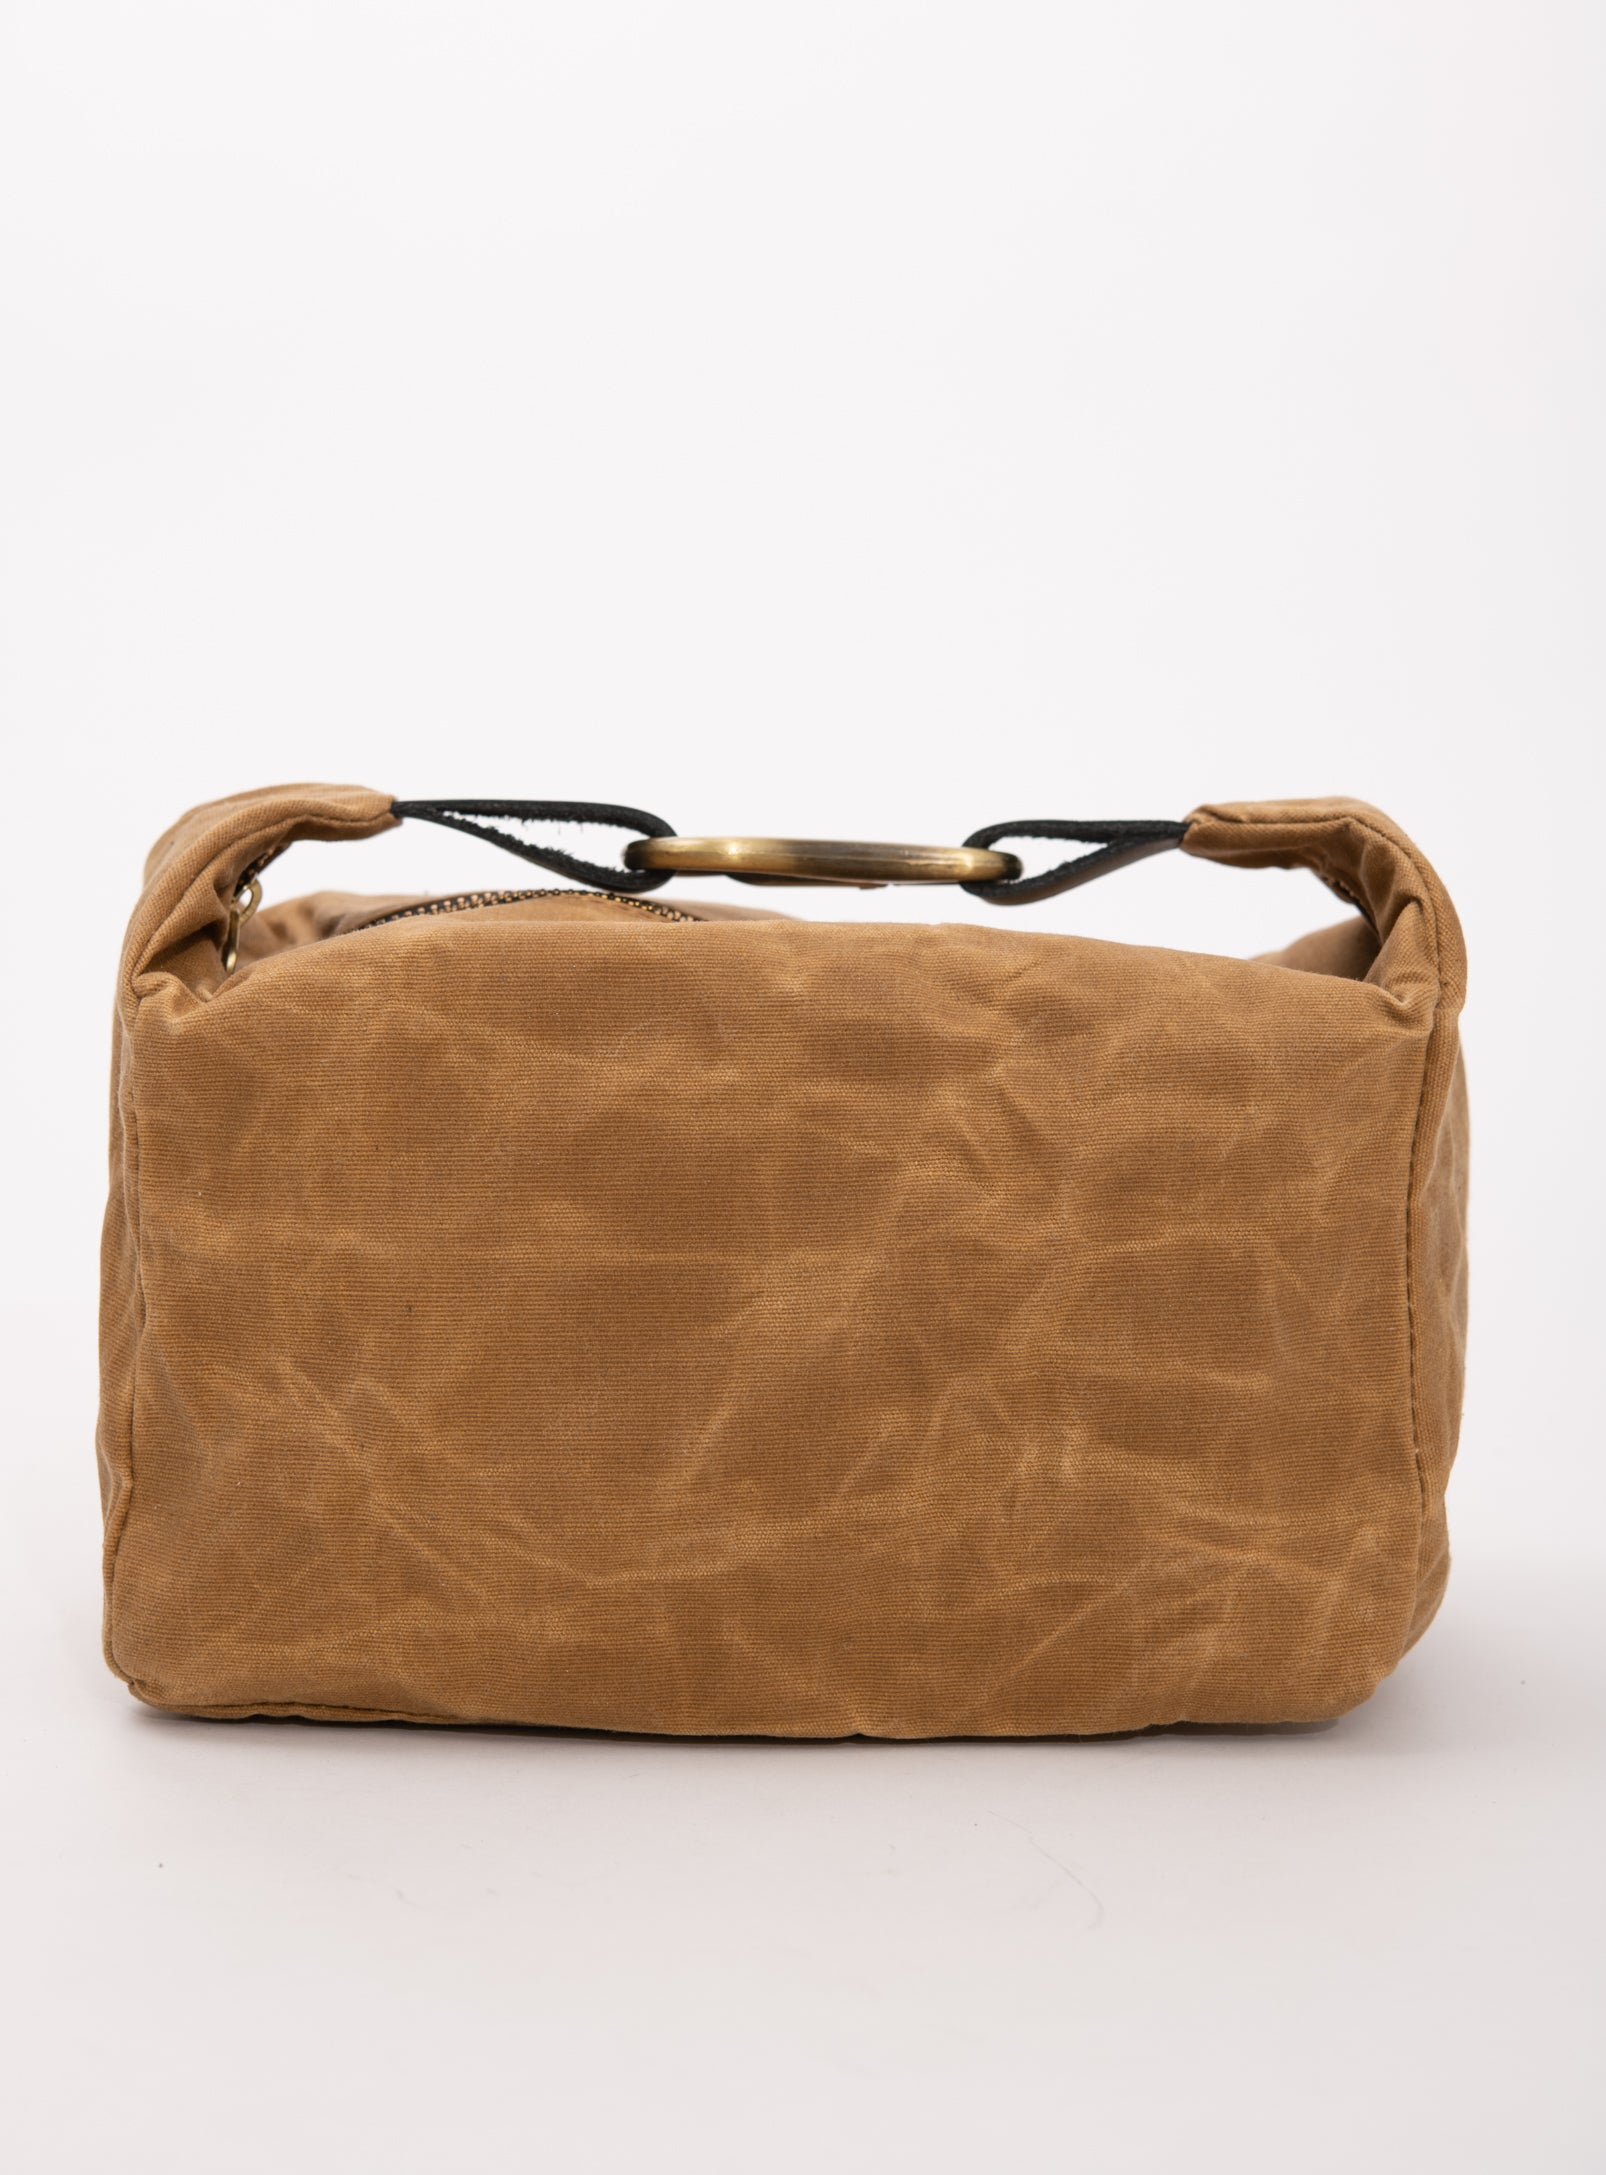 Veinage Travel case tan brown in waxed canvas DES CARRIÈRES model